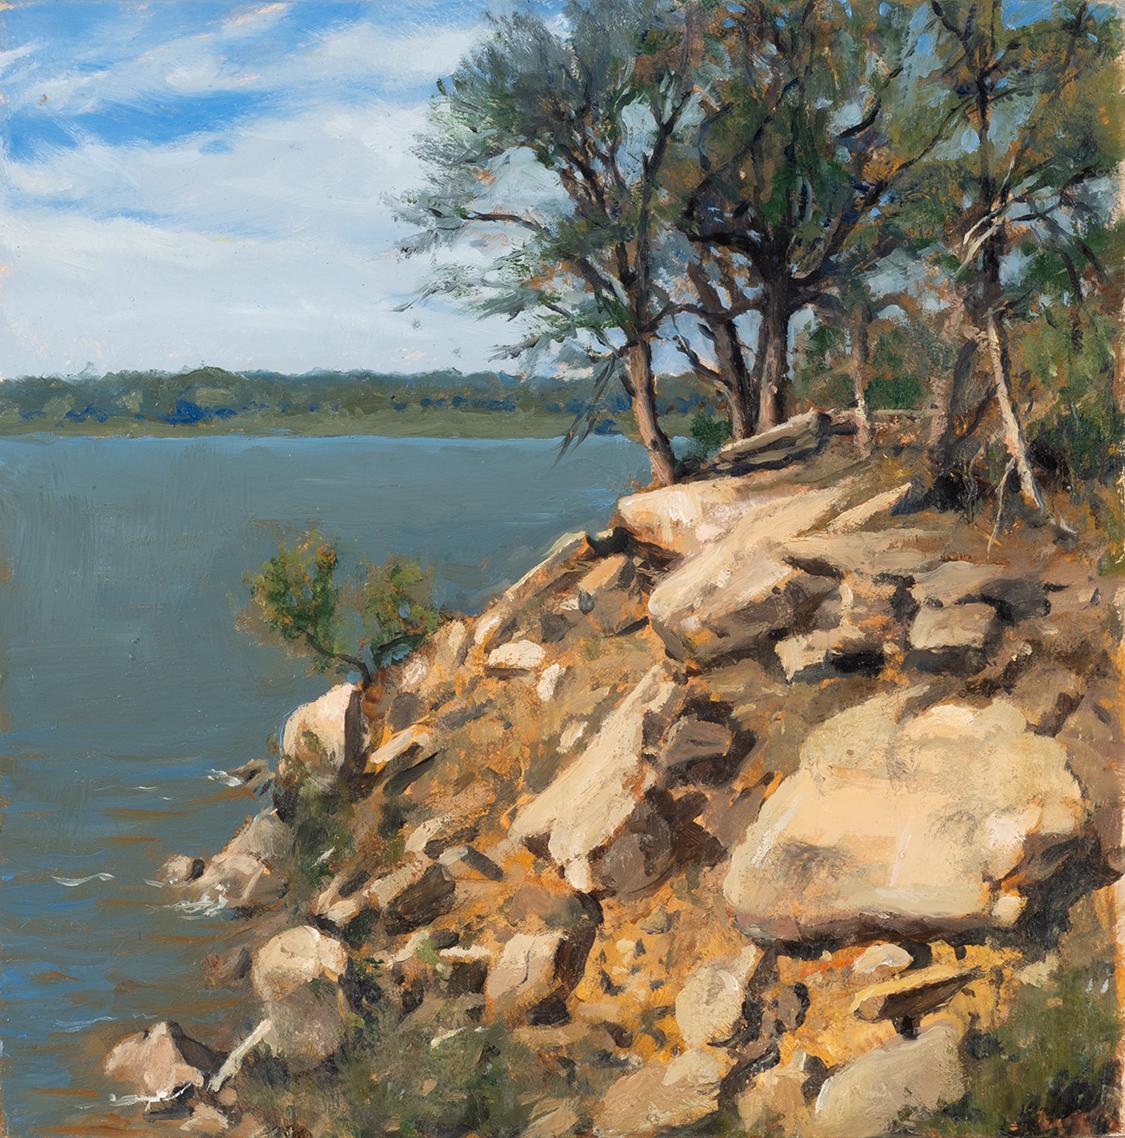 Bob Stuth-Wade Landscape Painting - Here with Bhakti